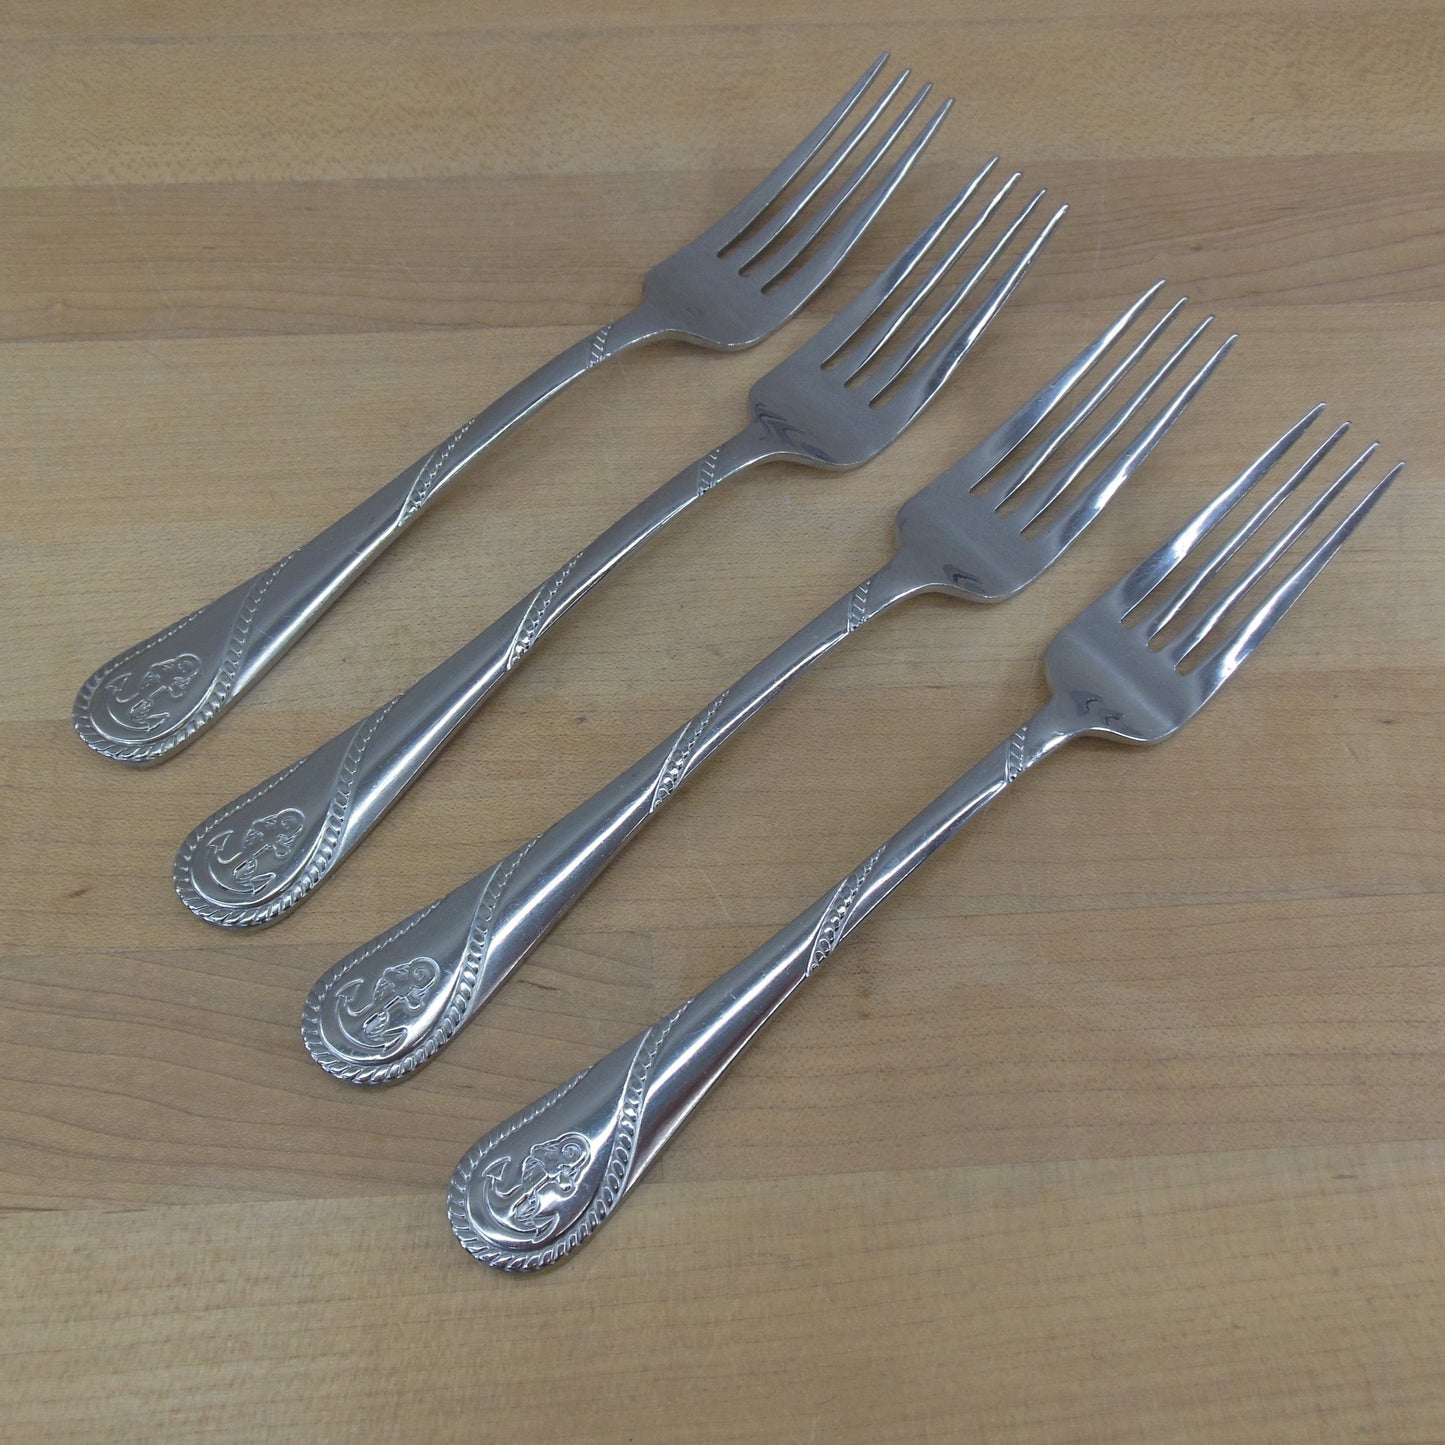 Towle Stainless Anchor Flatware - Dinner Forks 4 Set used rope